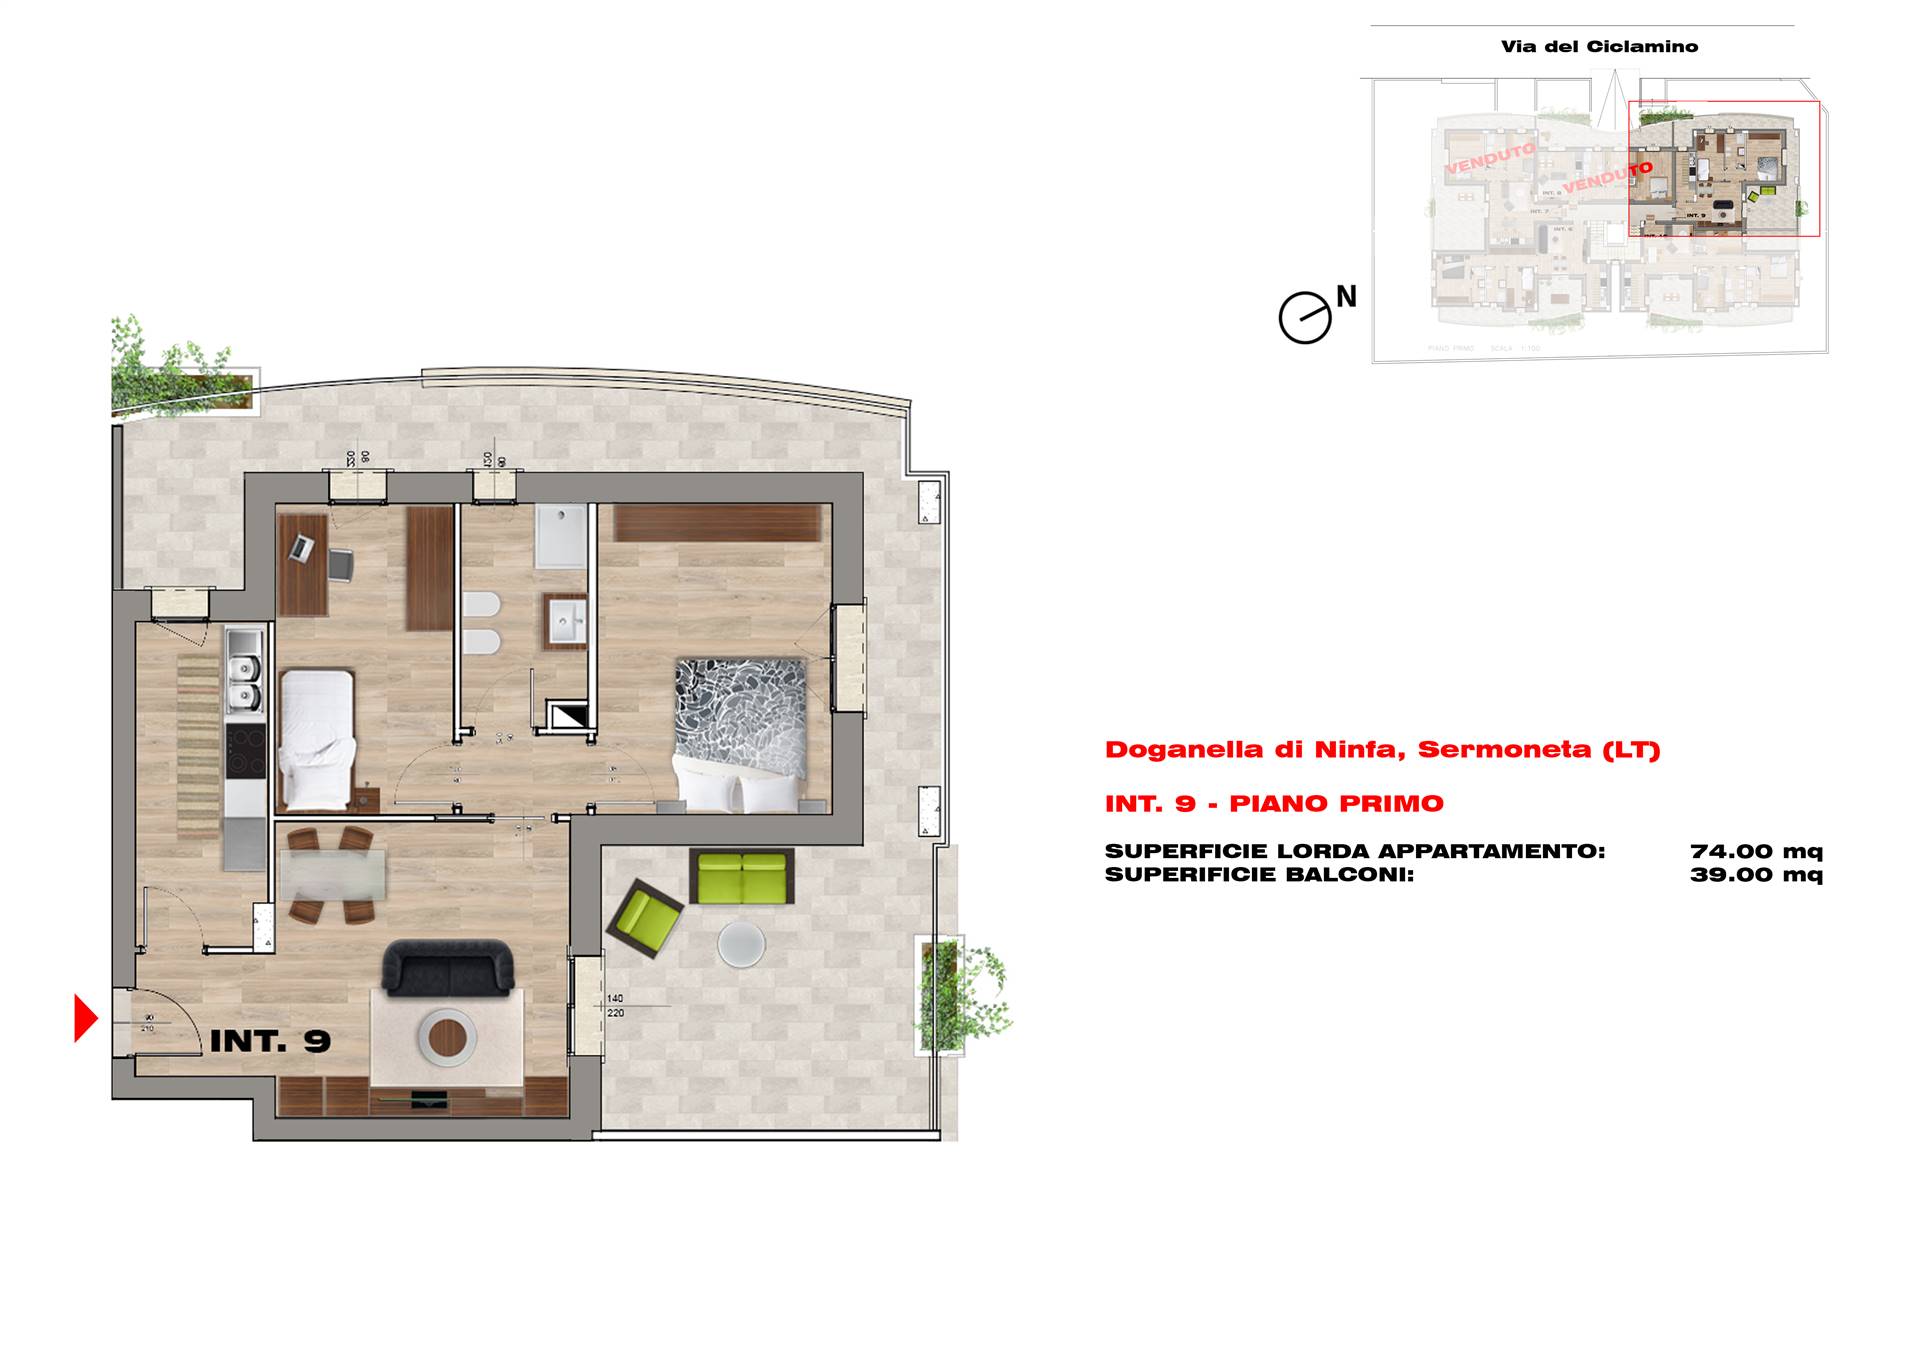 BIVIO DI DOGANELLA, SERMONETA, Apartment for sale of 74 Sq. mt., New construction, Energetic class: G, placed at 1° on 3, composed by: 4 Rooms, 